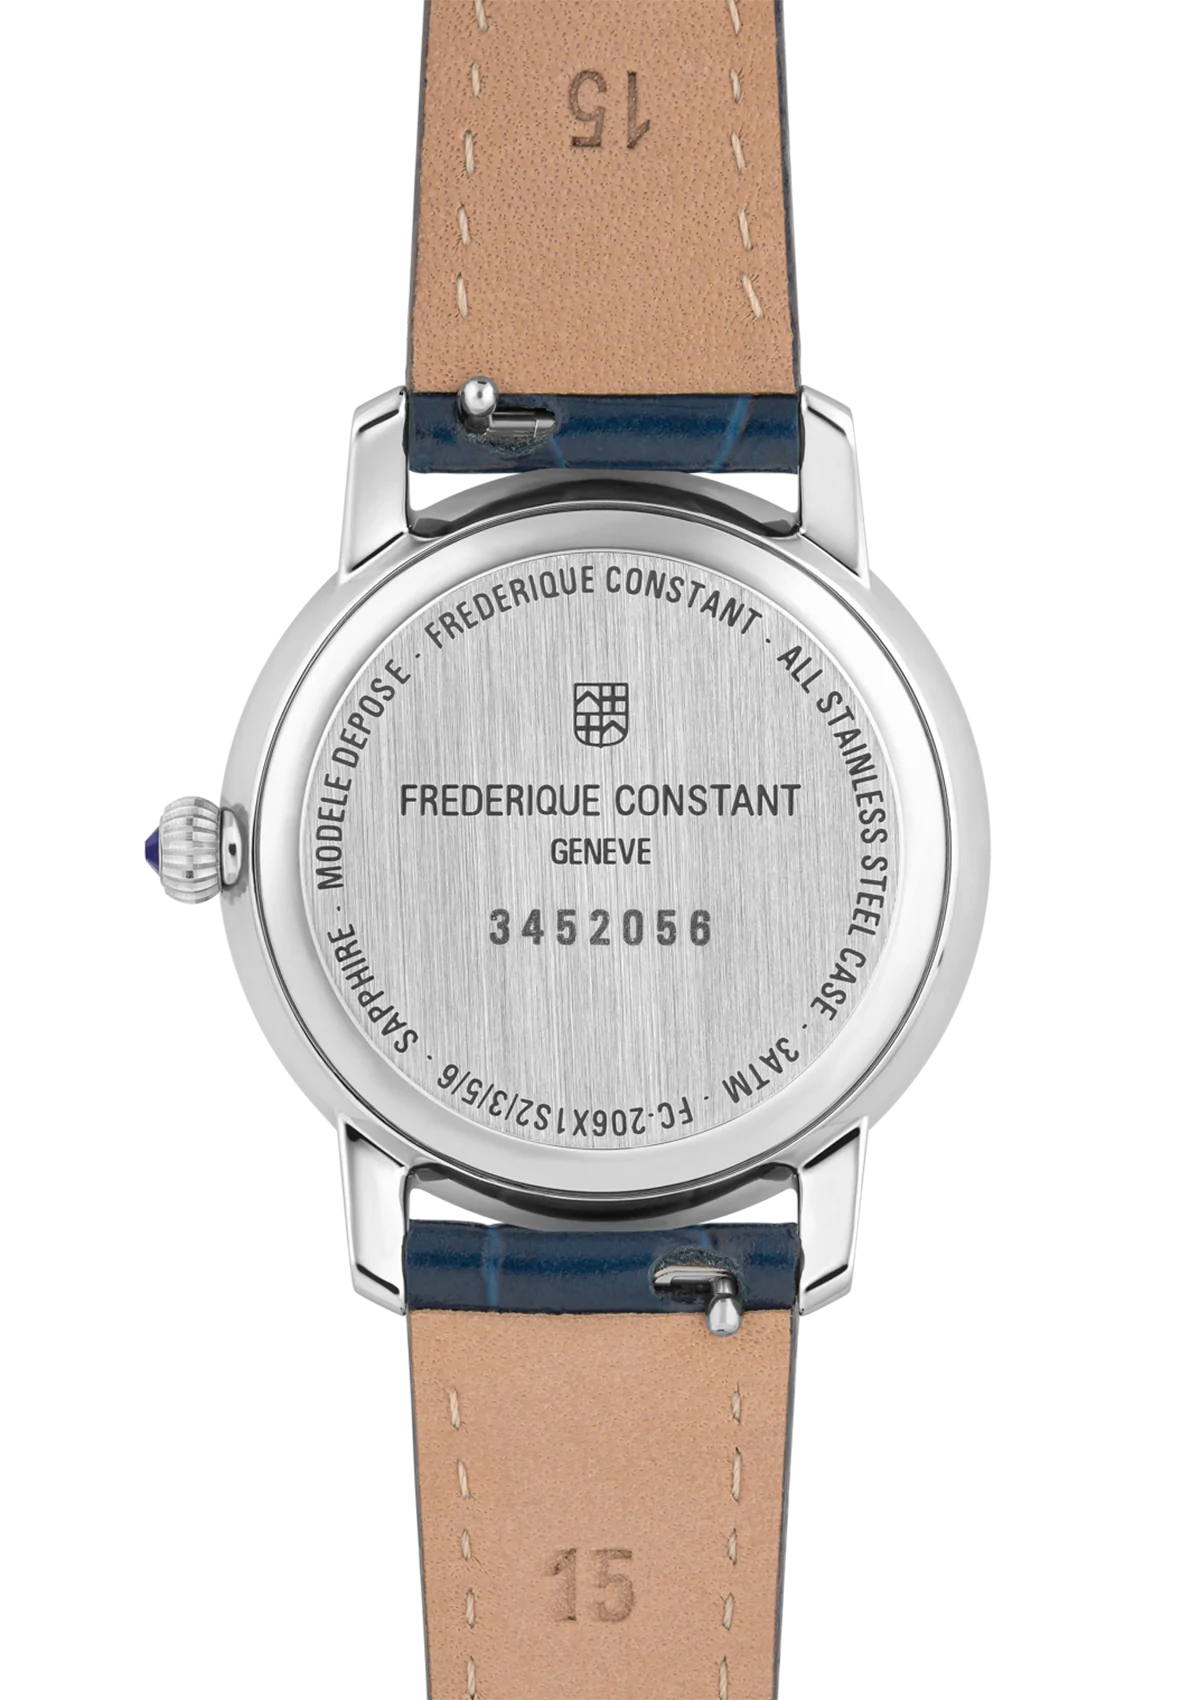 Frederique Constant Slimline Lds Moonphase S/S WR30 - 30mm FC-206SW1S6